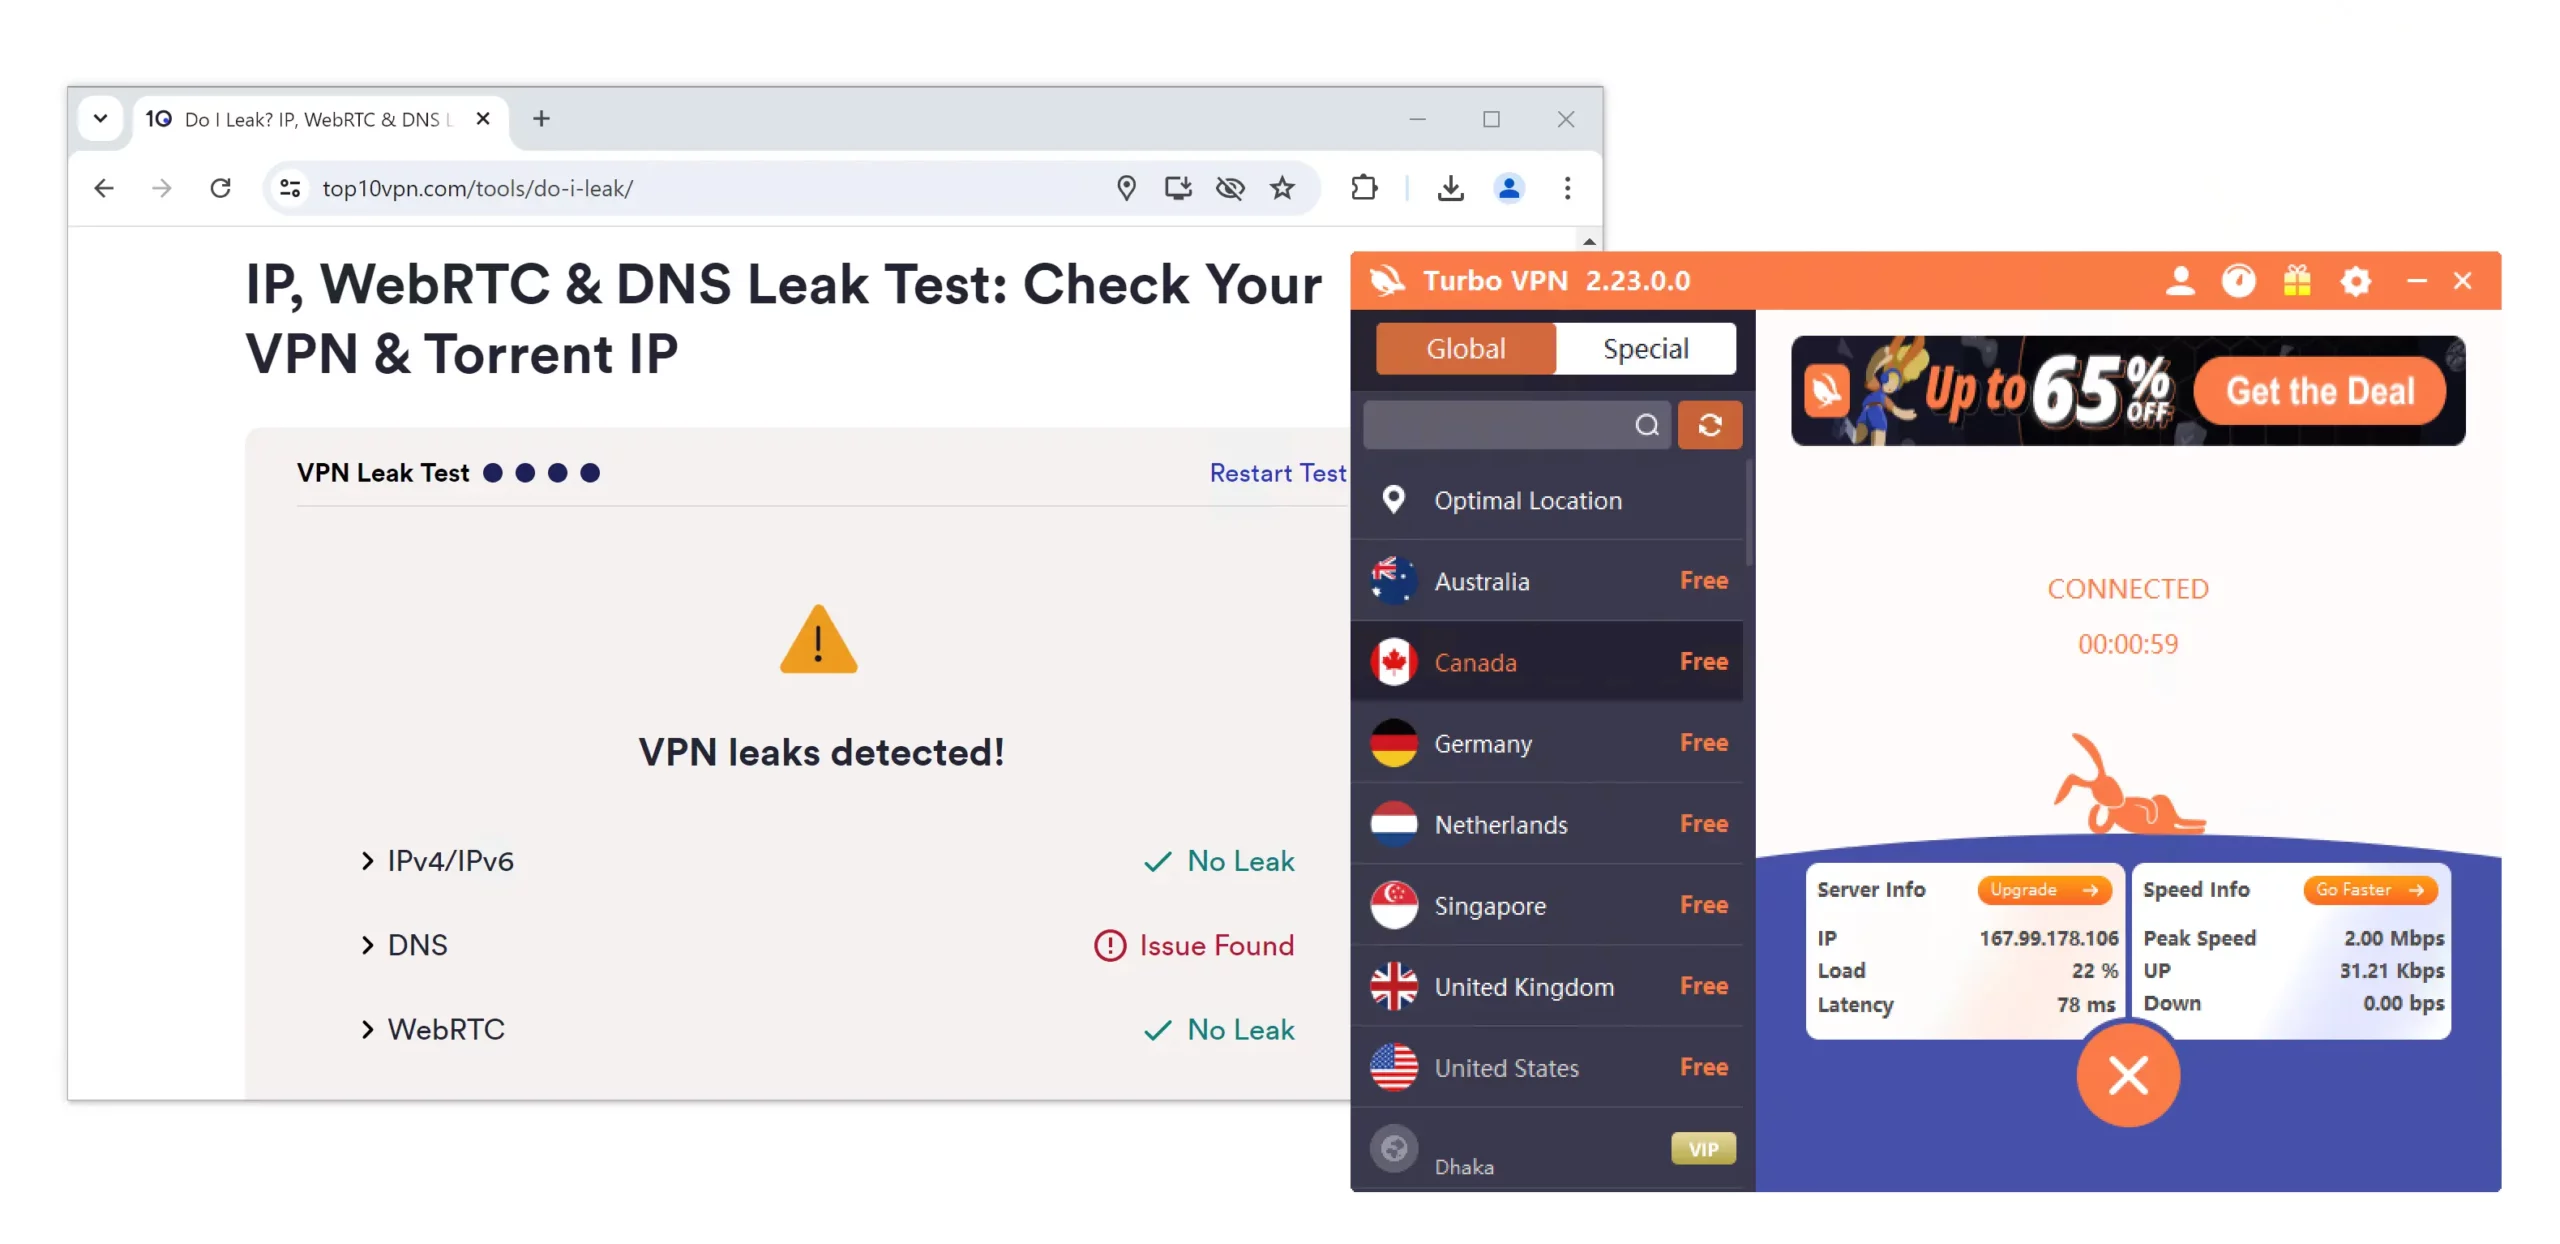 Detecting DNS leaks while using Turbo VPN with our leak test tool